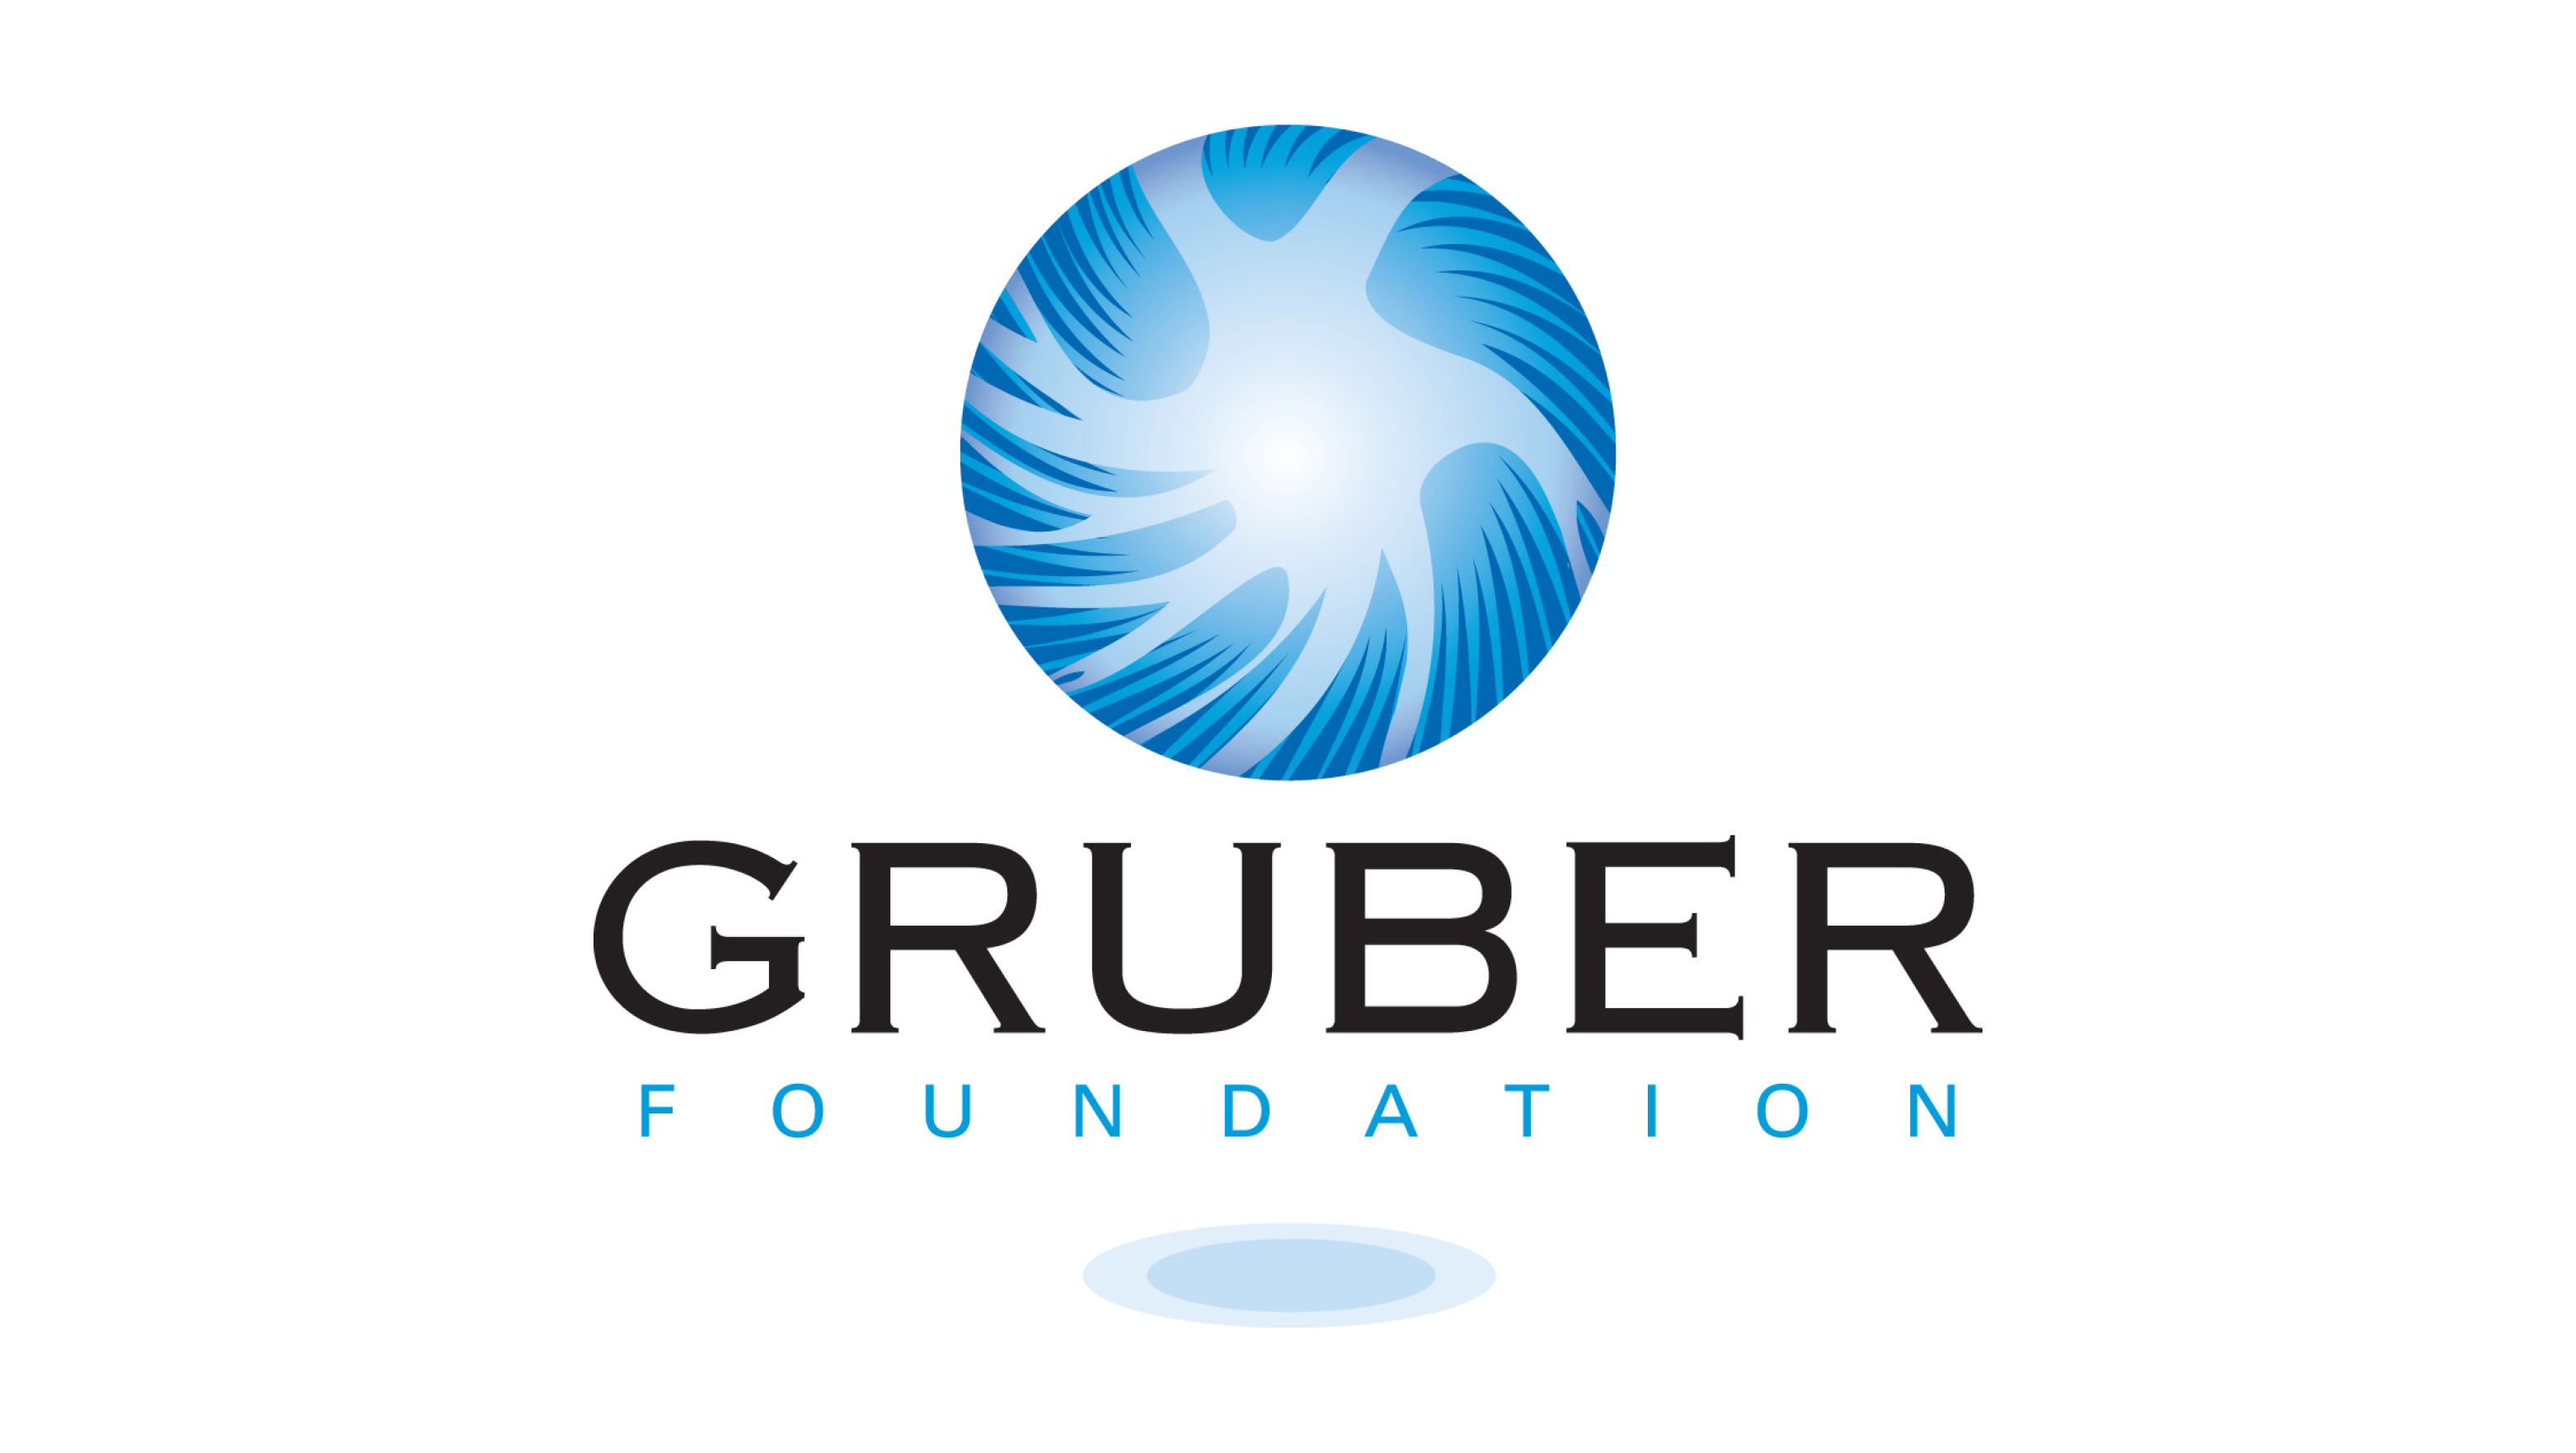 The Gruber Foundation is a Lecture and Event sponsor of Neuroscience 2021.